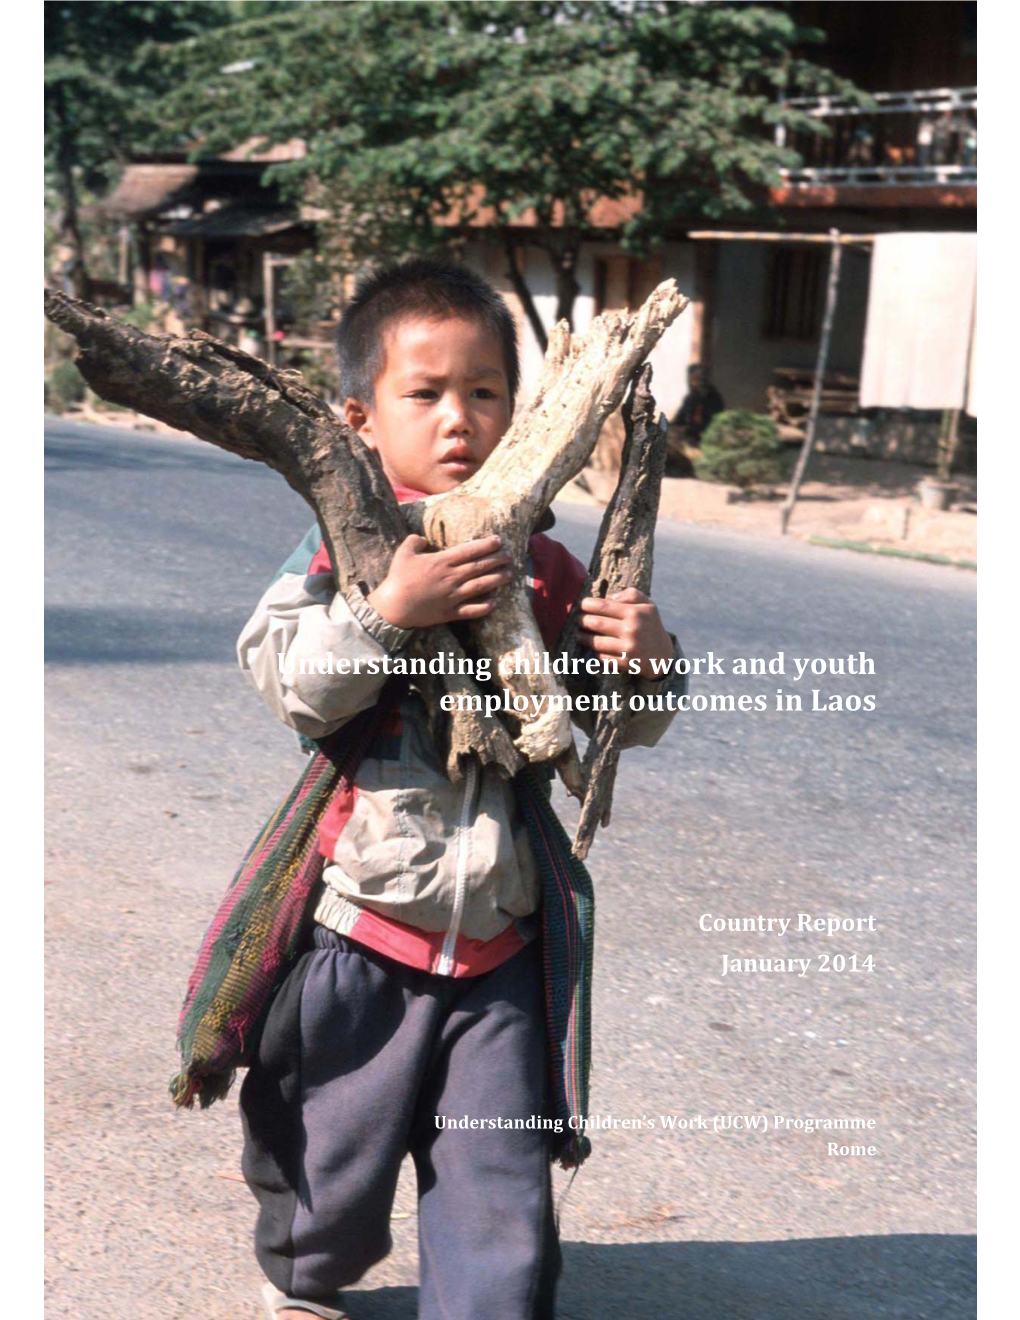 Understanding Children's Work and Youth Employment Outcomes in Laos